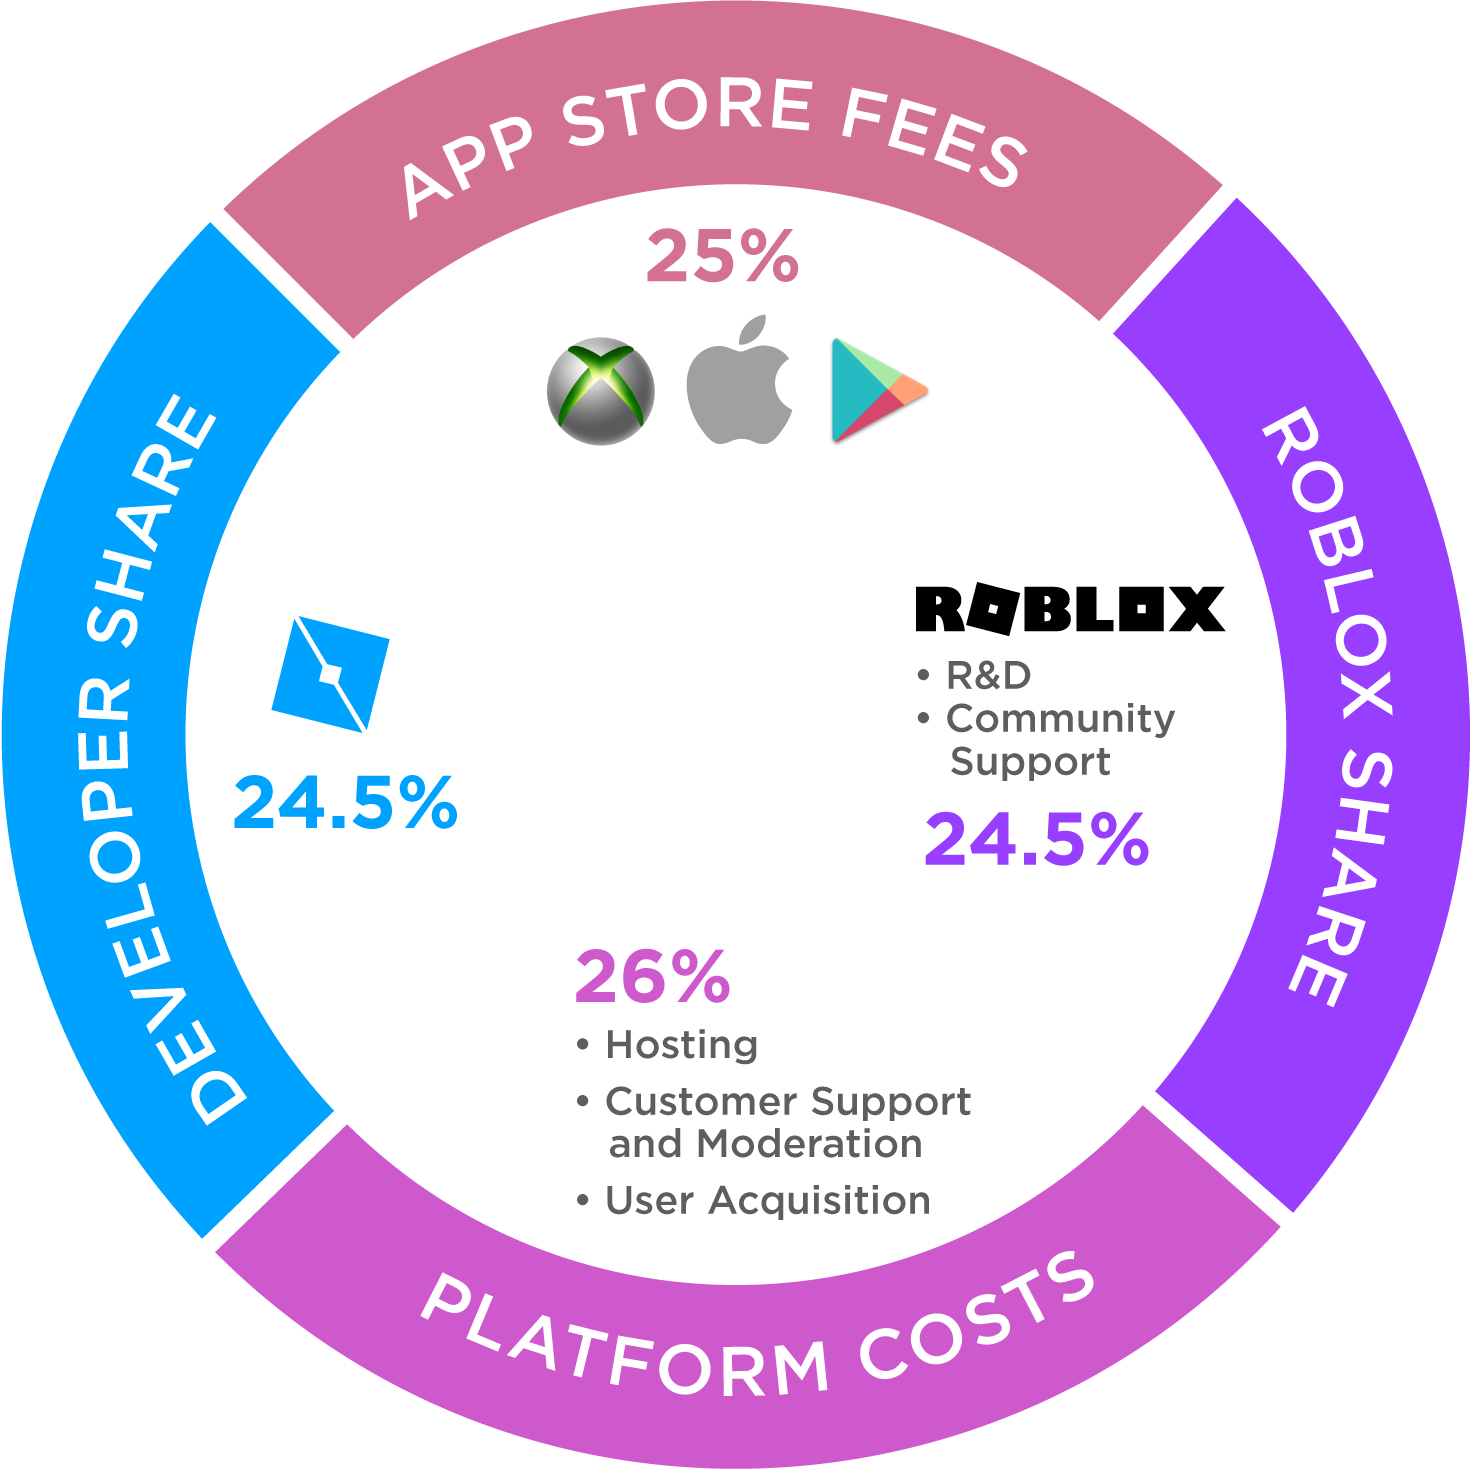 Creator Lessons From Apple And Roblox - roblox makes first acquisition with purchase of app